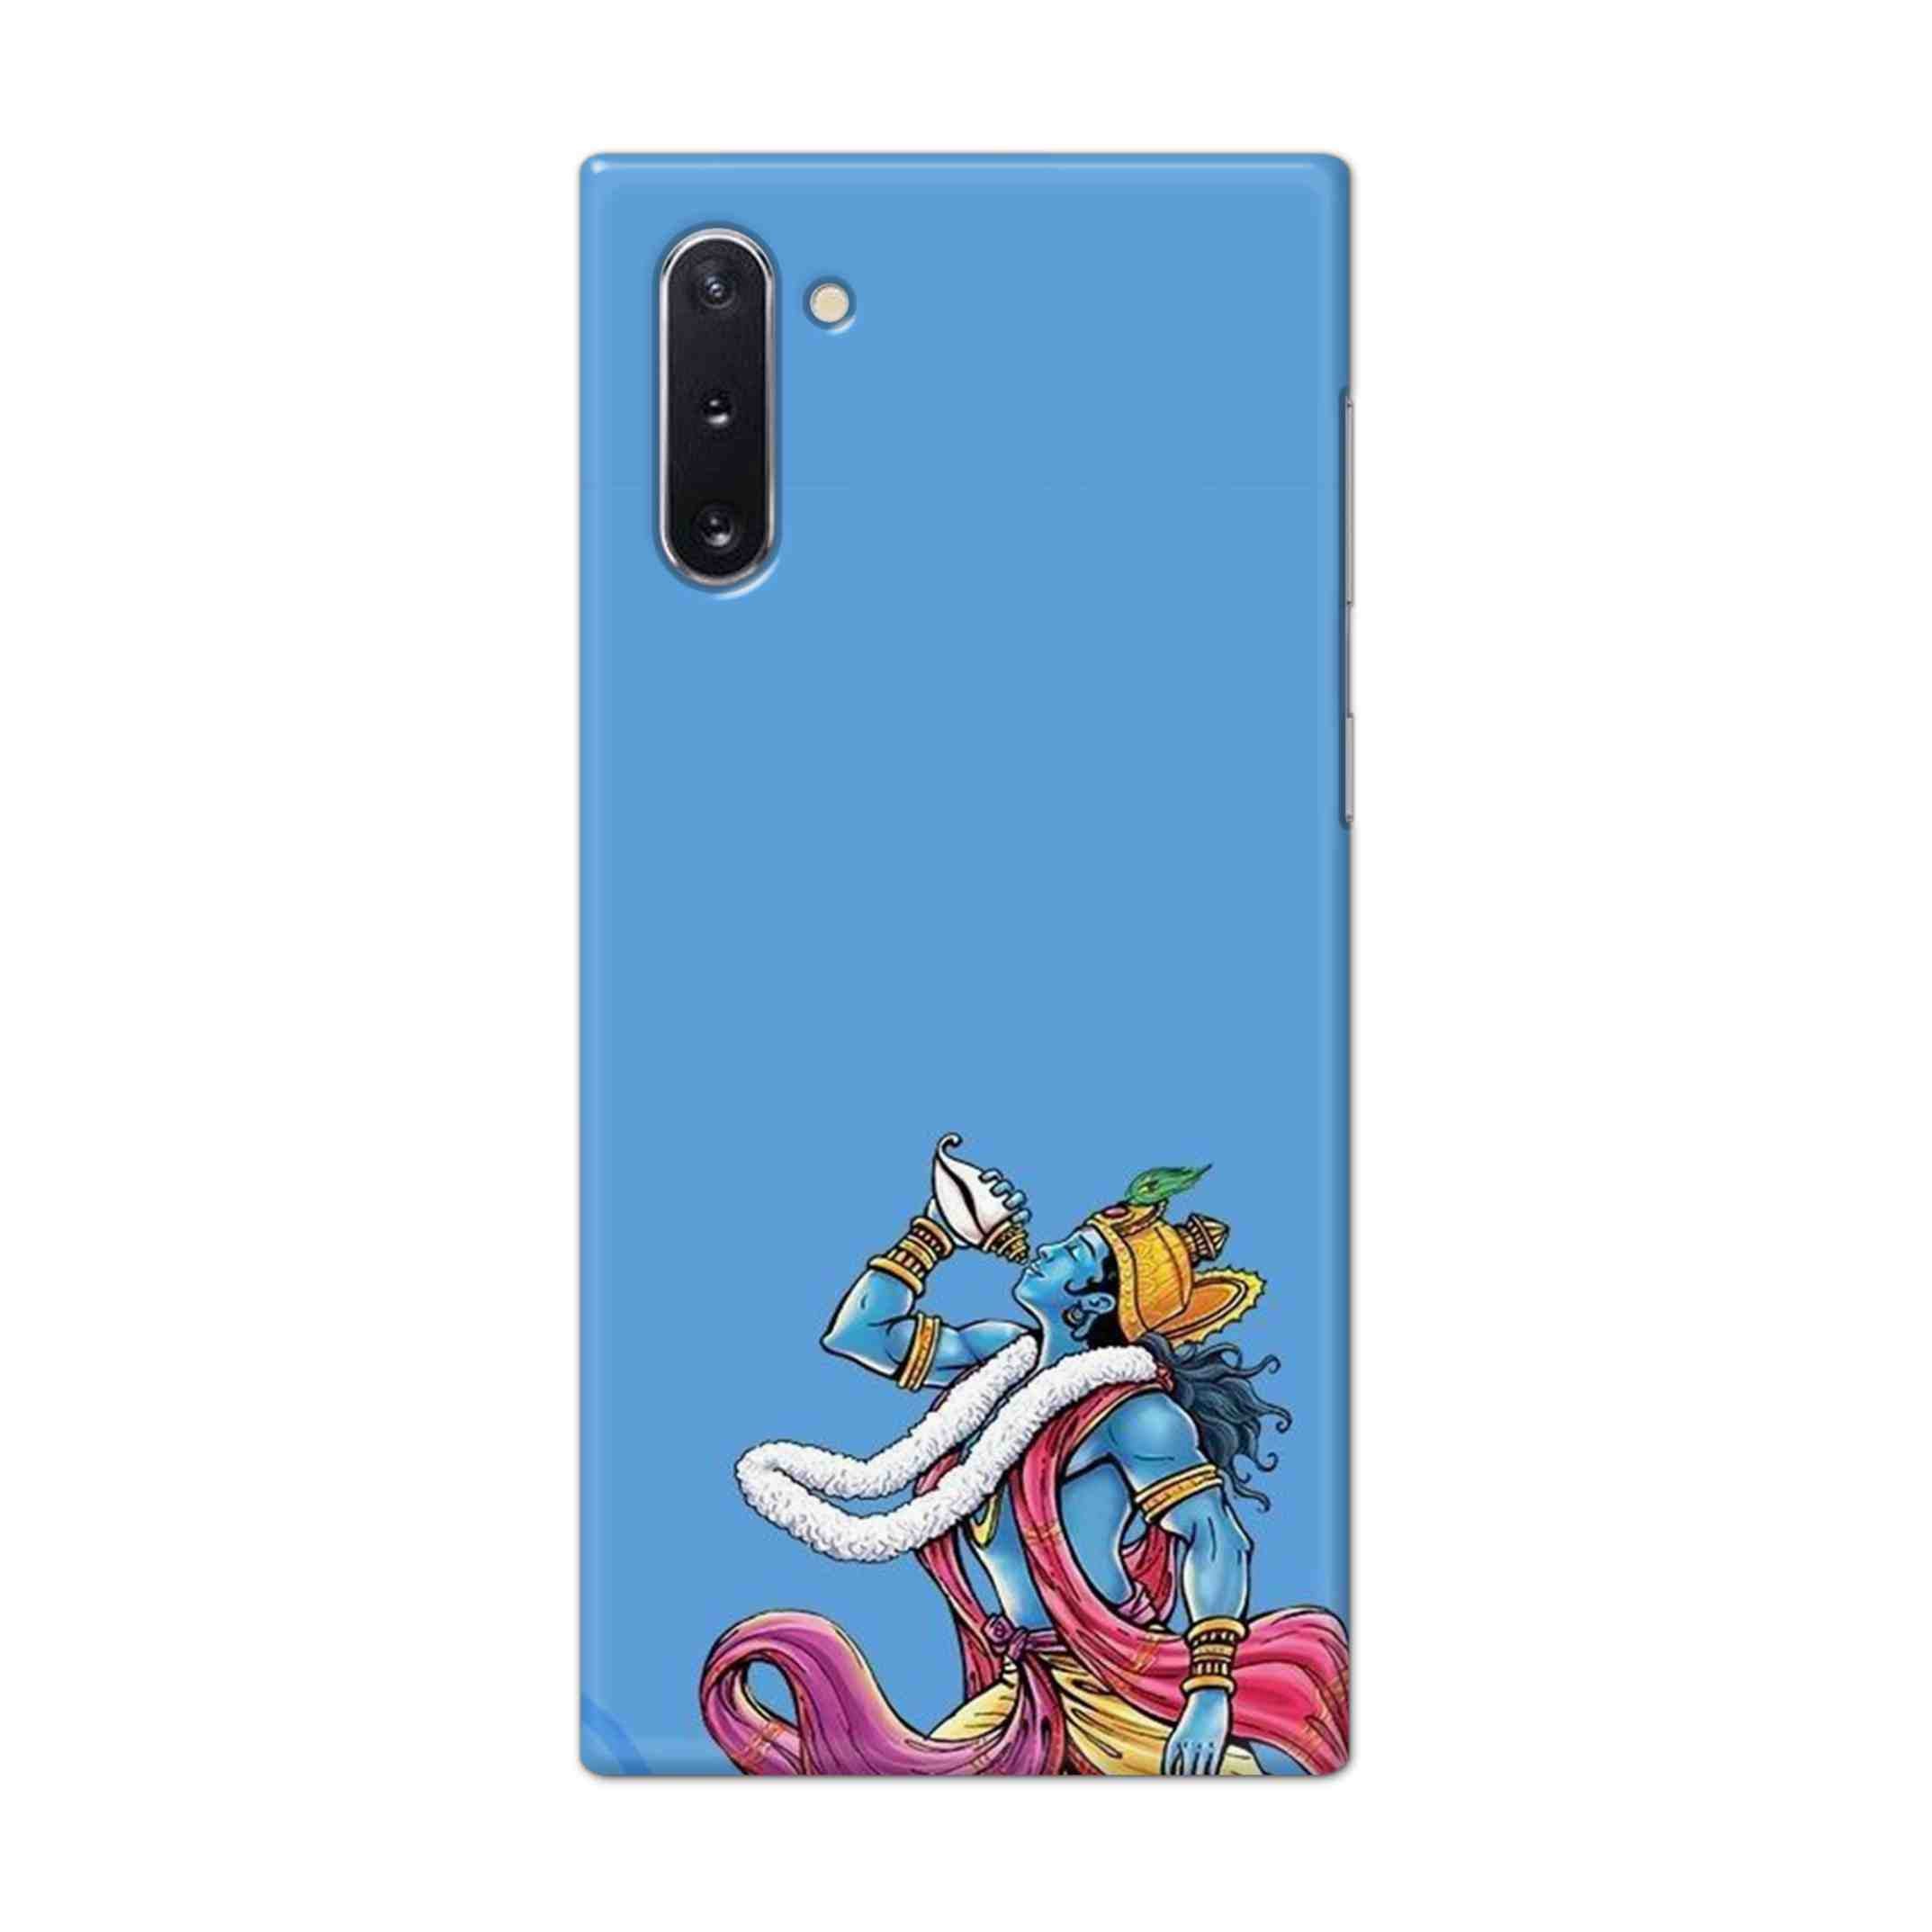 Buy Krishna Hard Back Mobile Phone Case Cover For Samsung Galaxy Note 10 Online